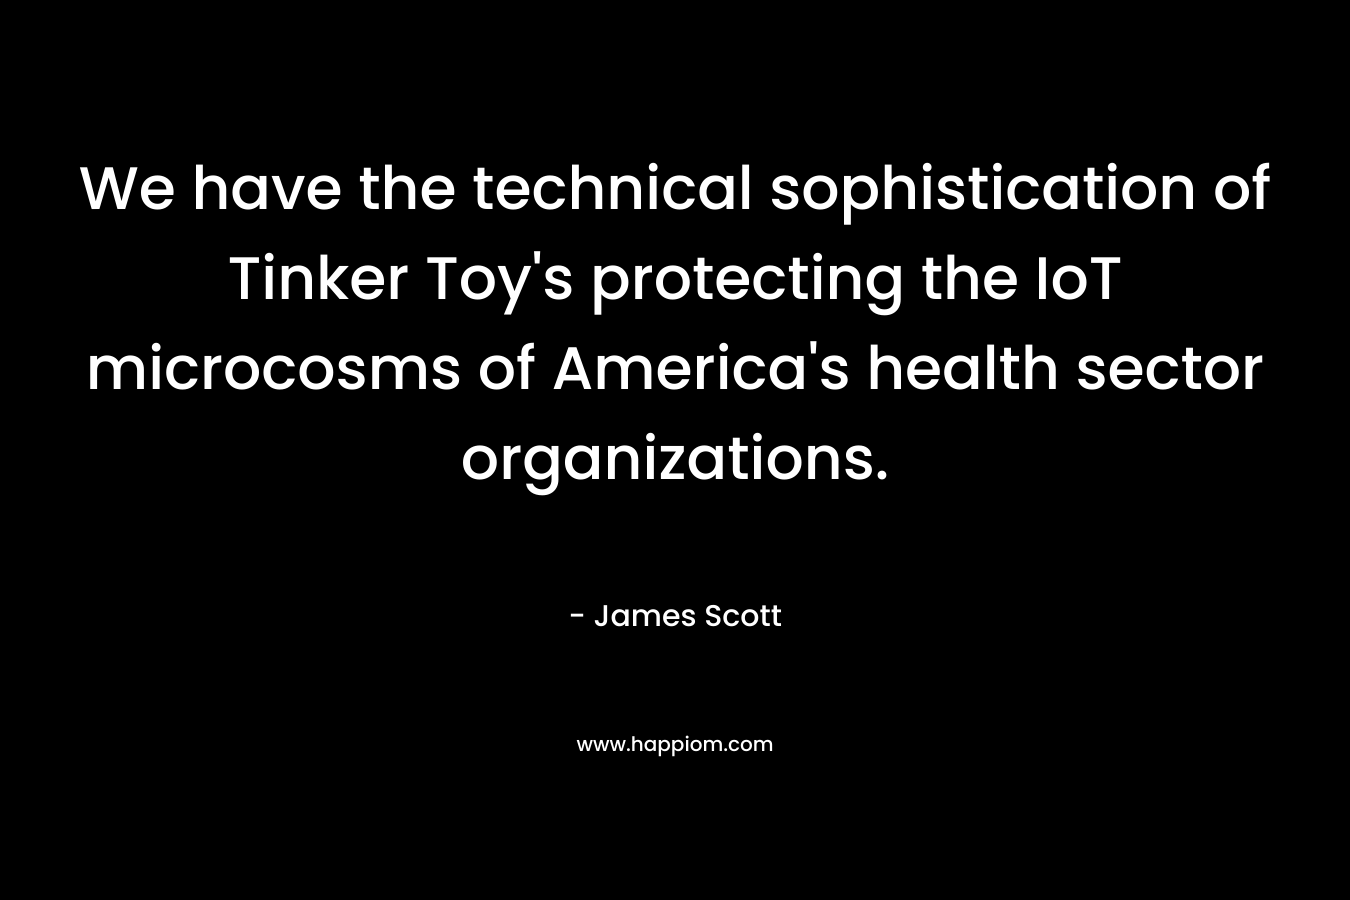 We have the technical sophistication of Tinker Toy's protecting the IoT microcosms of America's health sector organizations.